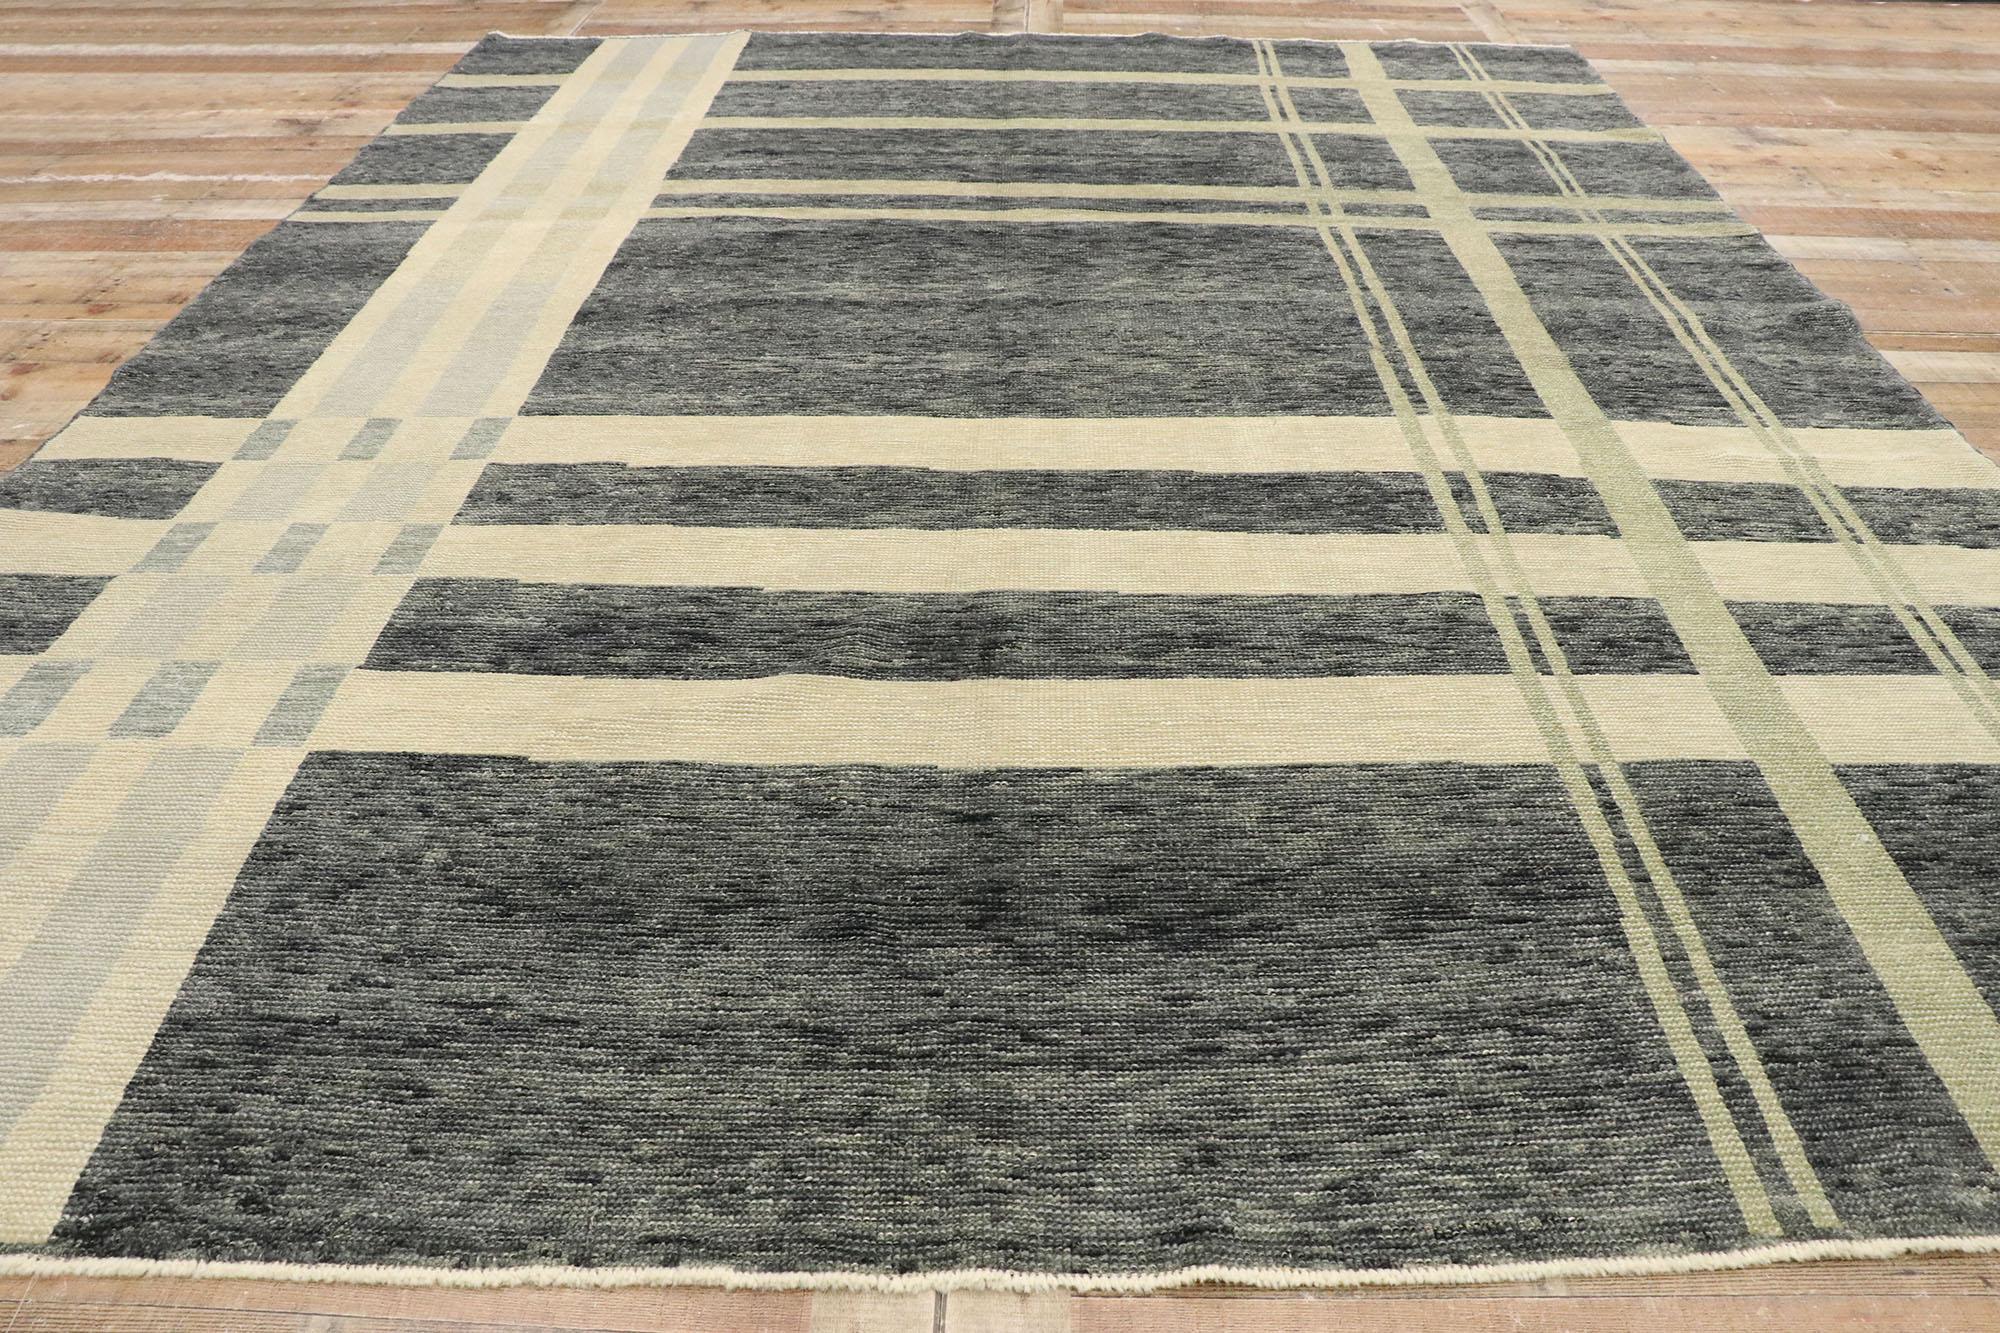 Turkish New Contemporary Neutral Plaid Tartan Rug with Ivy League Style